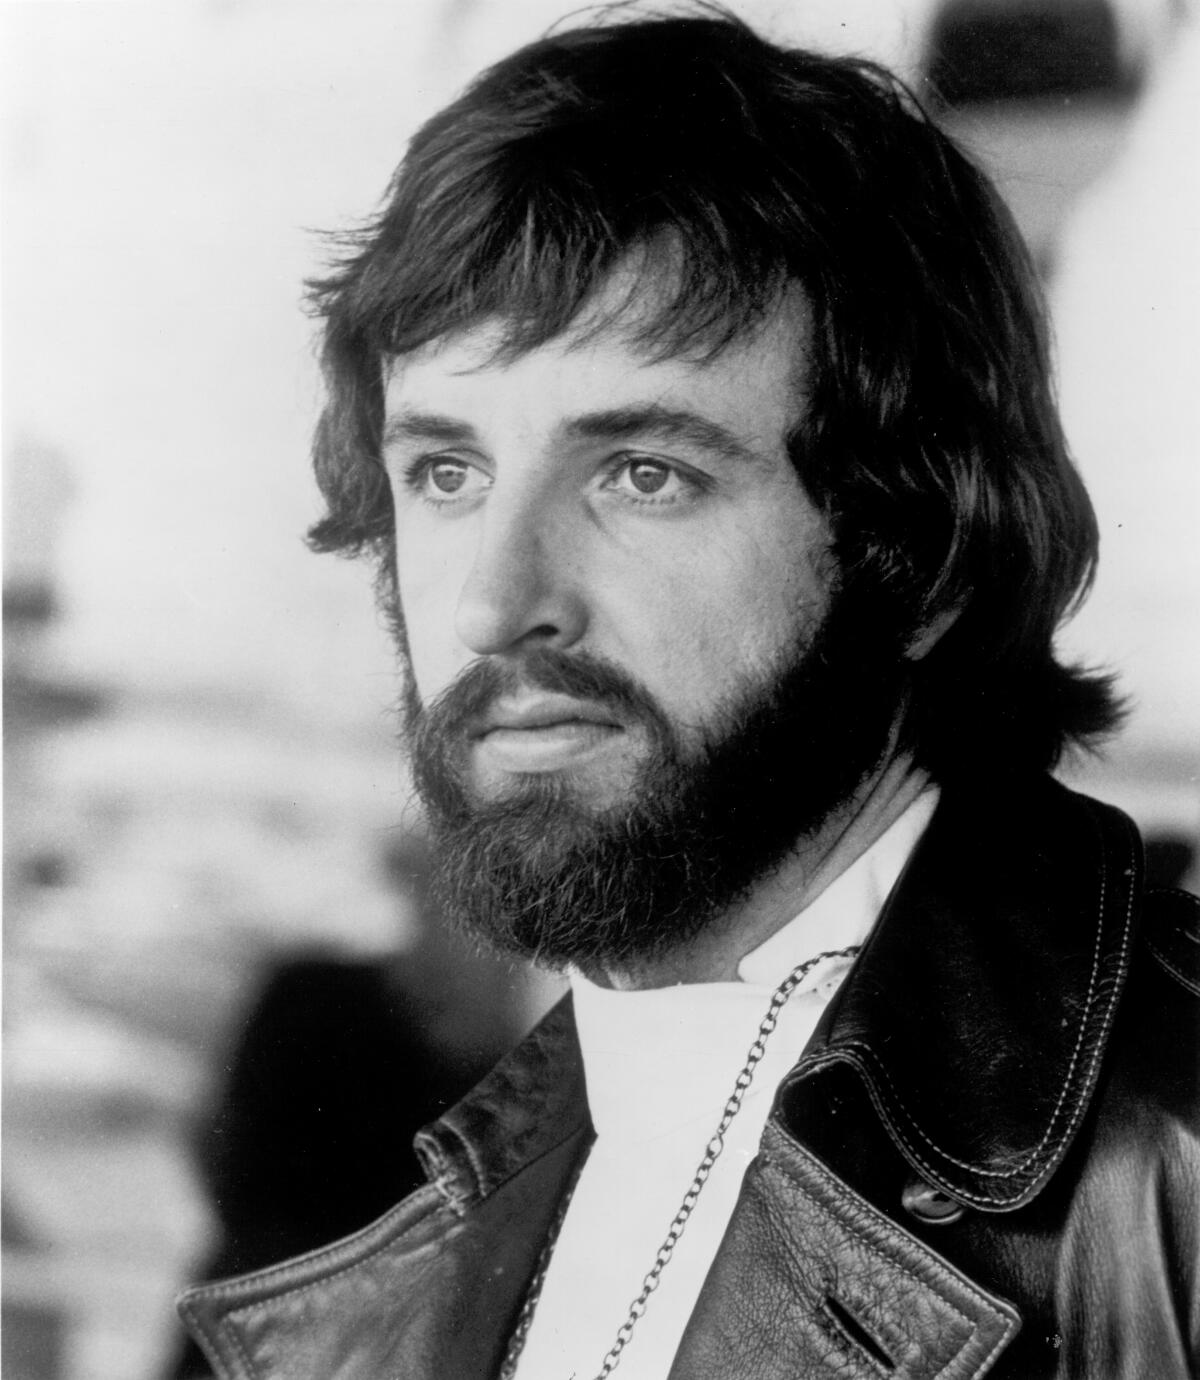 Photo portrait of Terry Kirkman staring off into the distance while wearing a leather jacket and Nehru collar shirt.